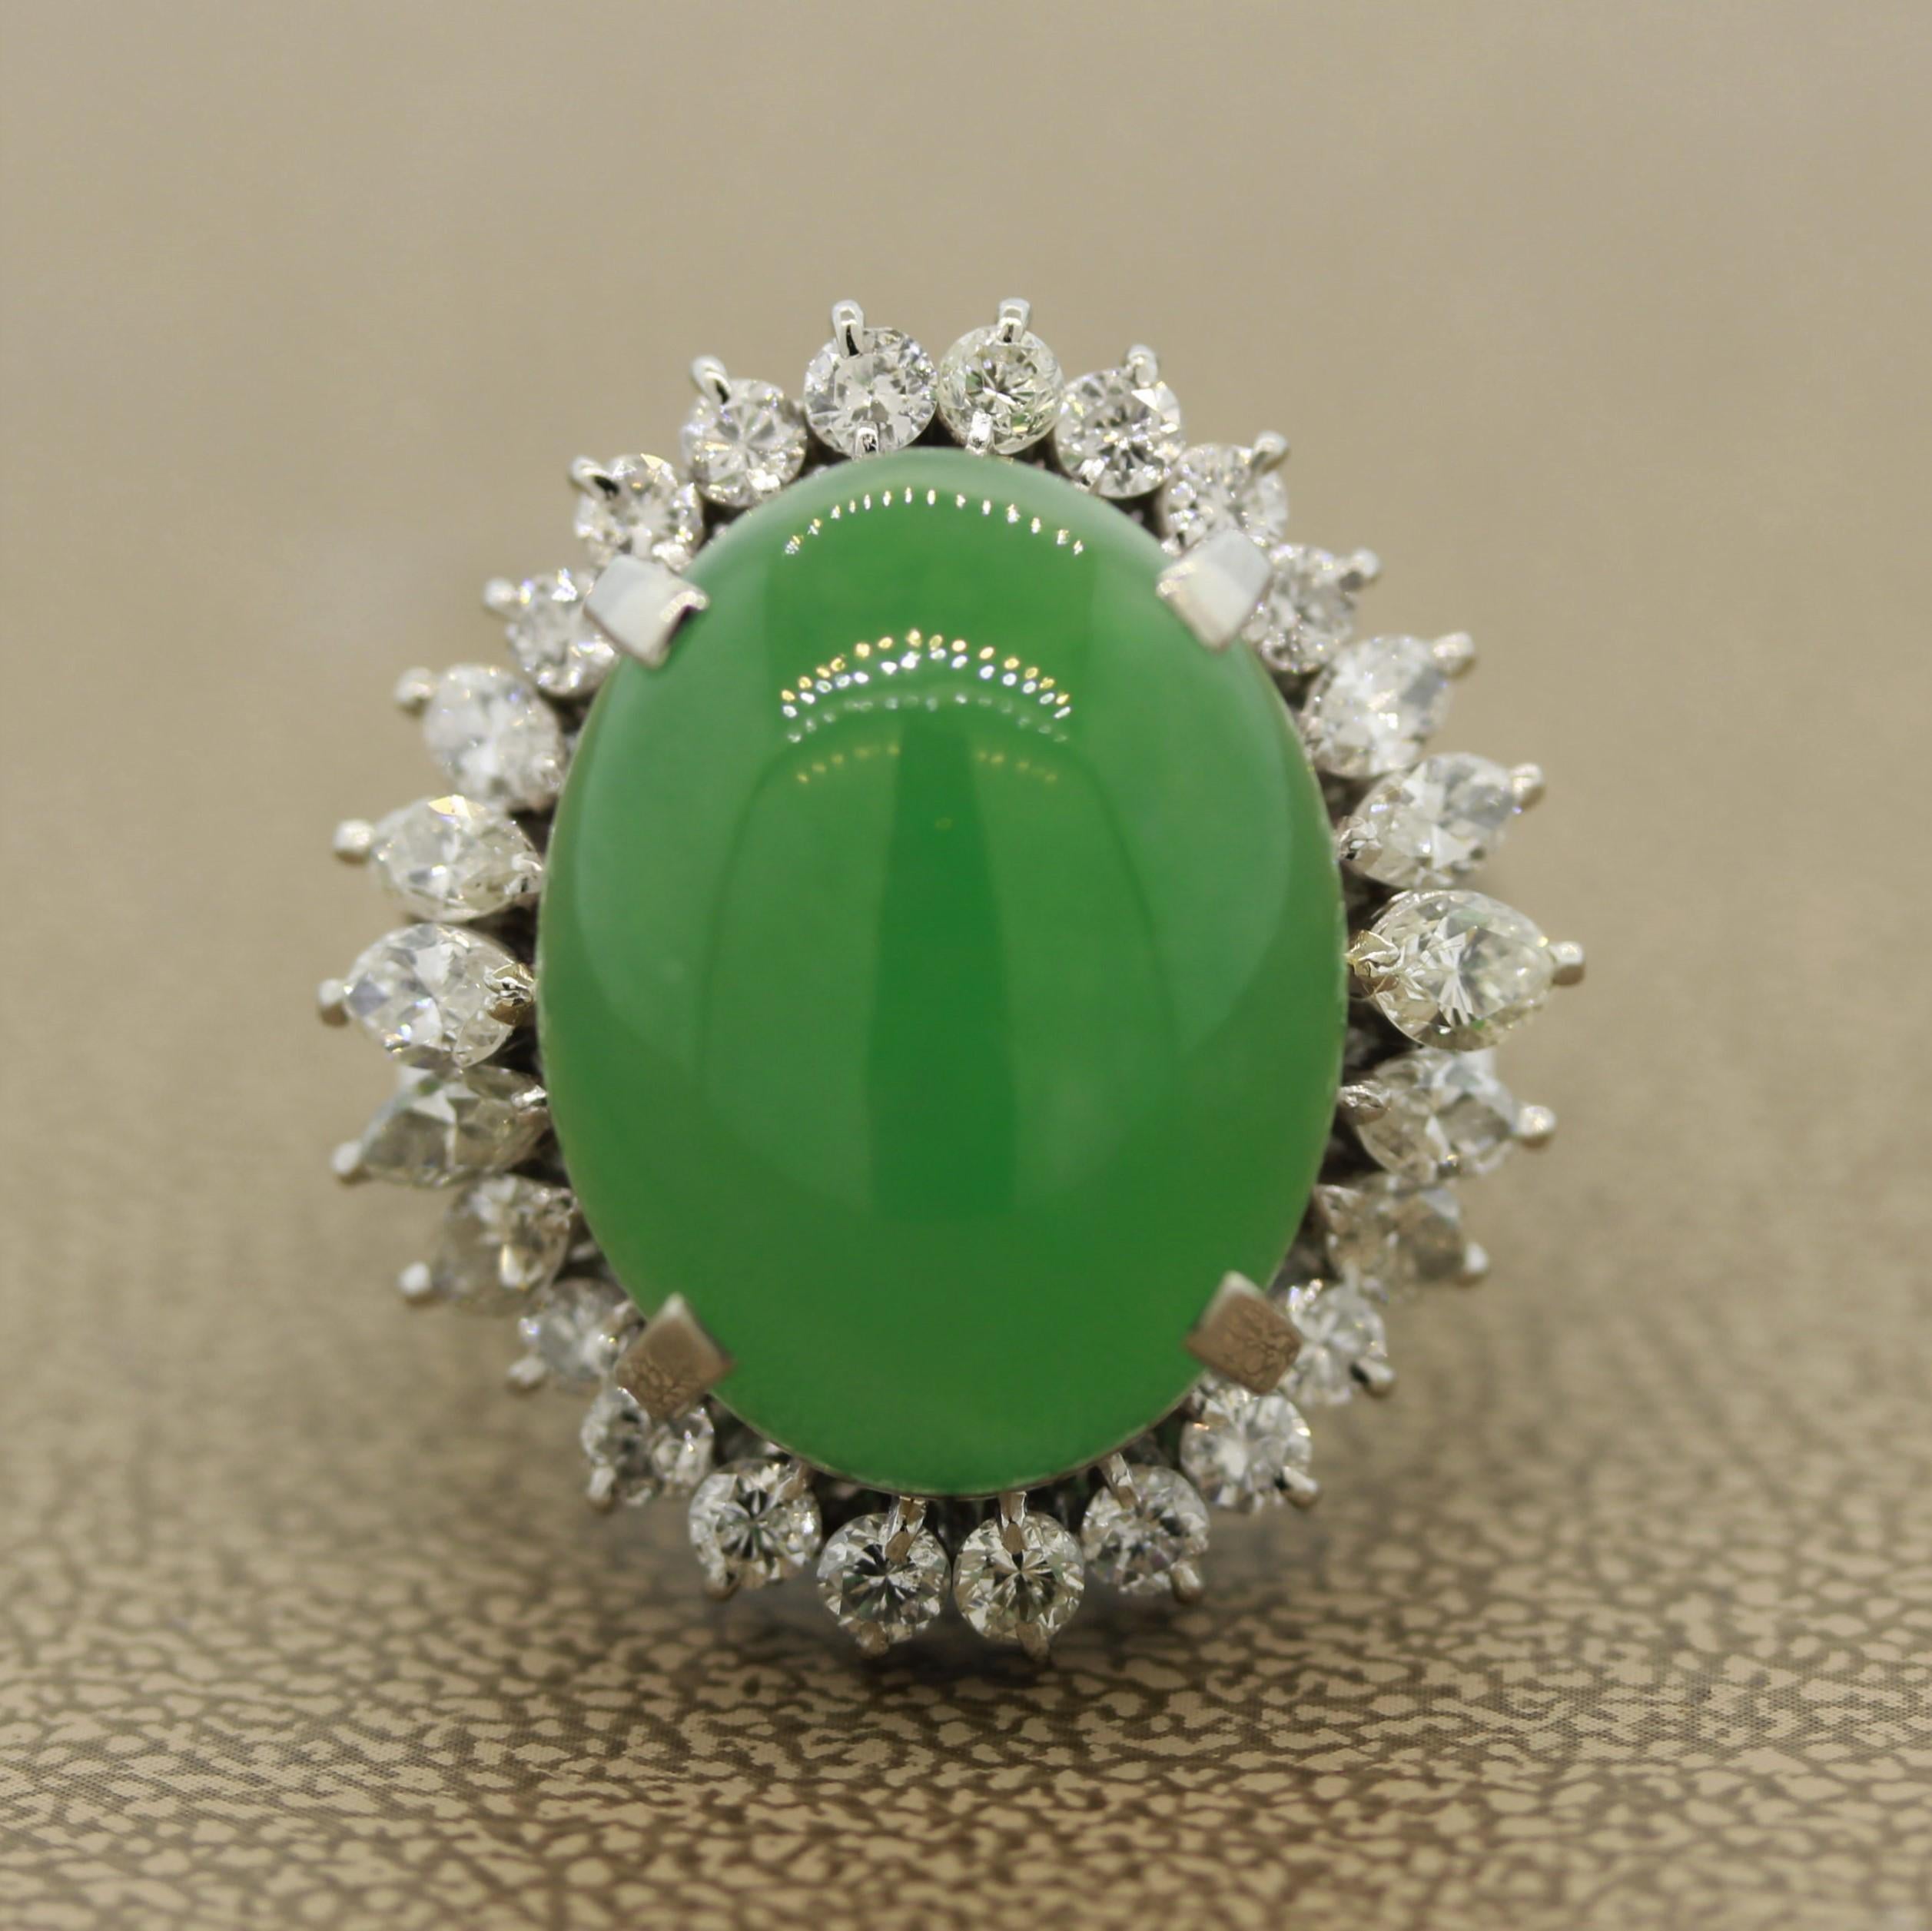 A fabulously large and impressive jadeite jade ring set in platinum. The jade weighs 18.30 carats and has a pleasing green color that seems to glow in the light. It is accented by 1.65 carats of large marquise and round brilliant cut diamonds. A